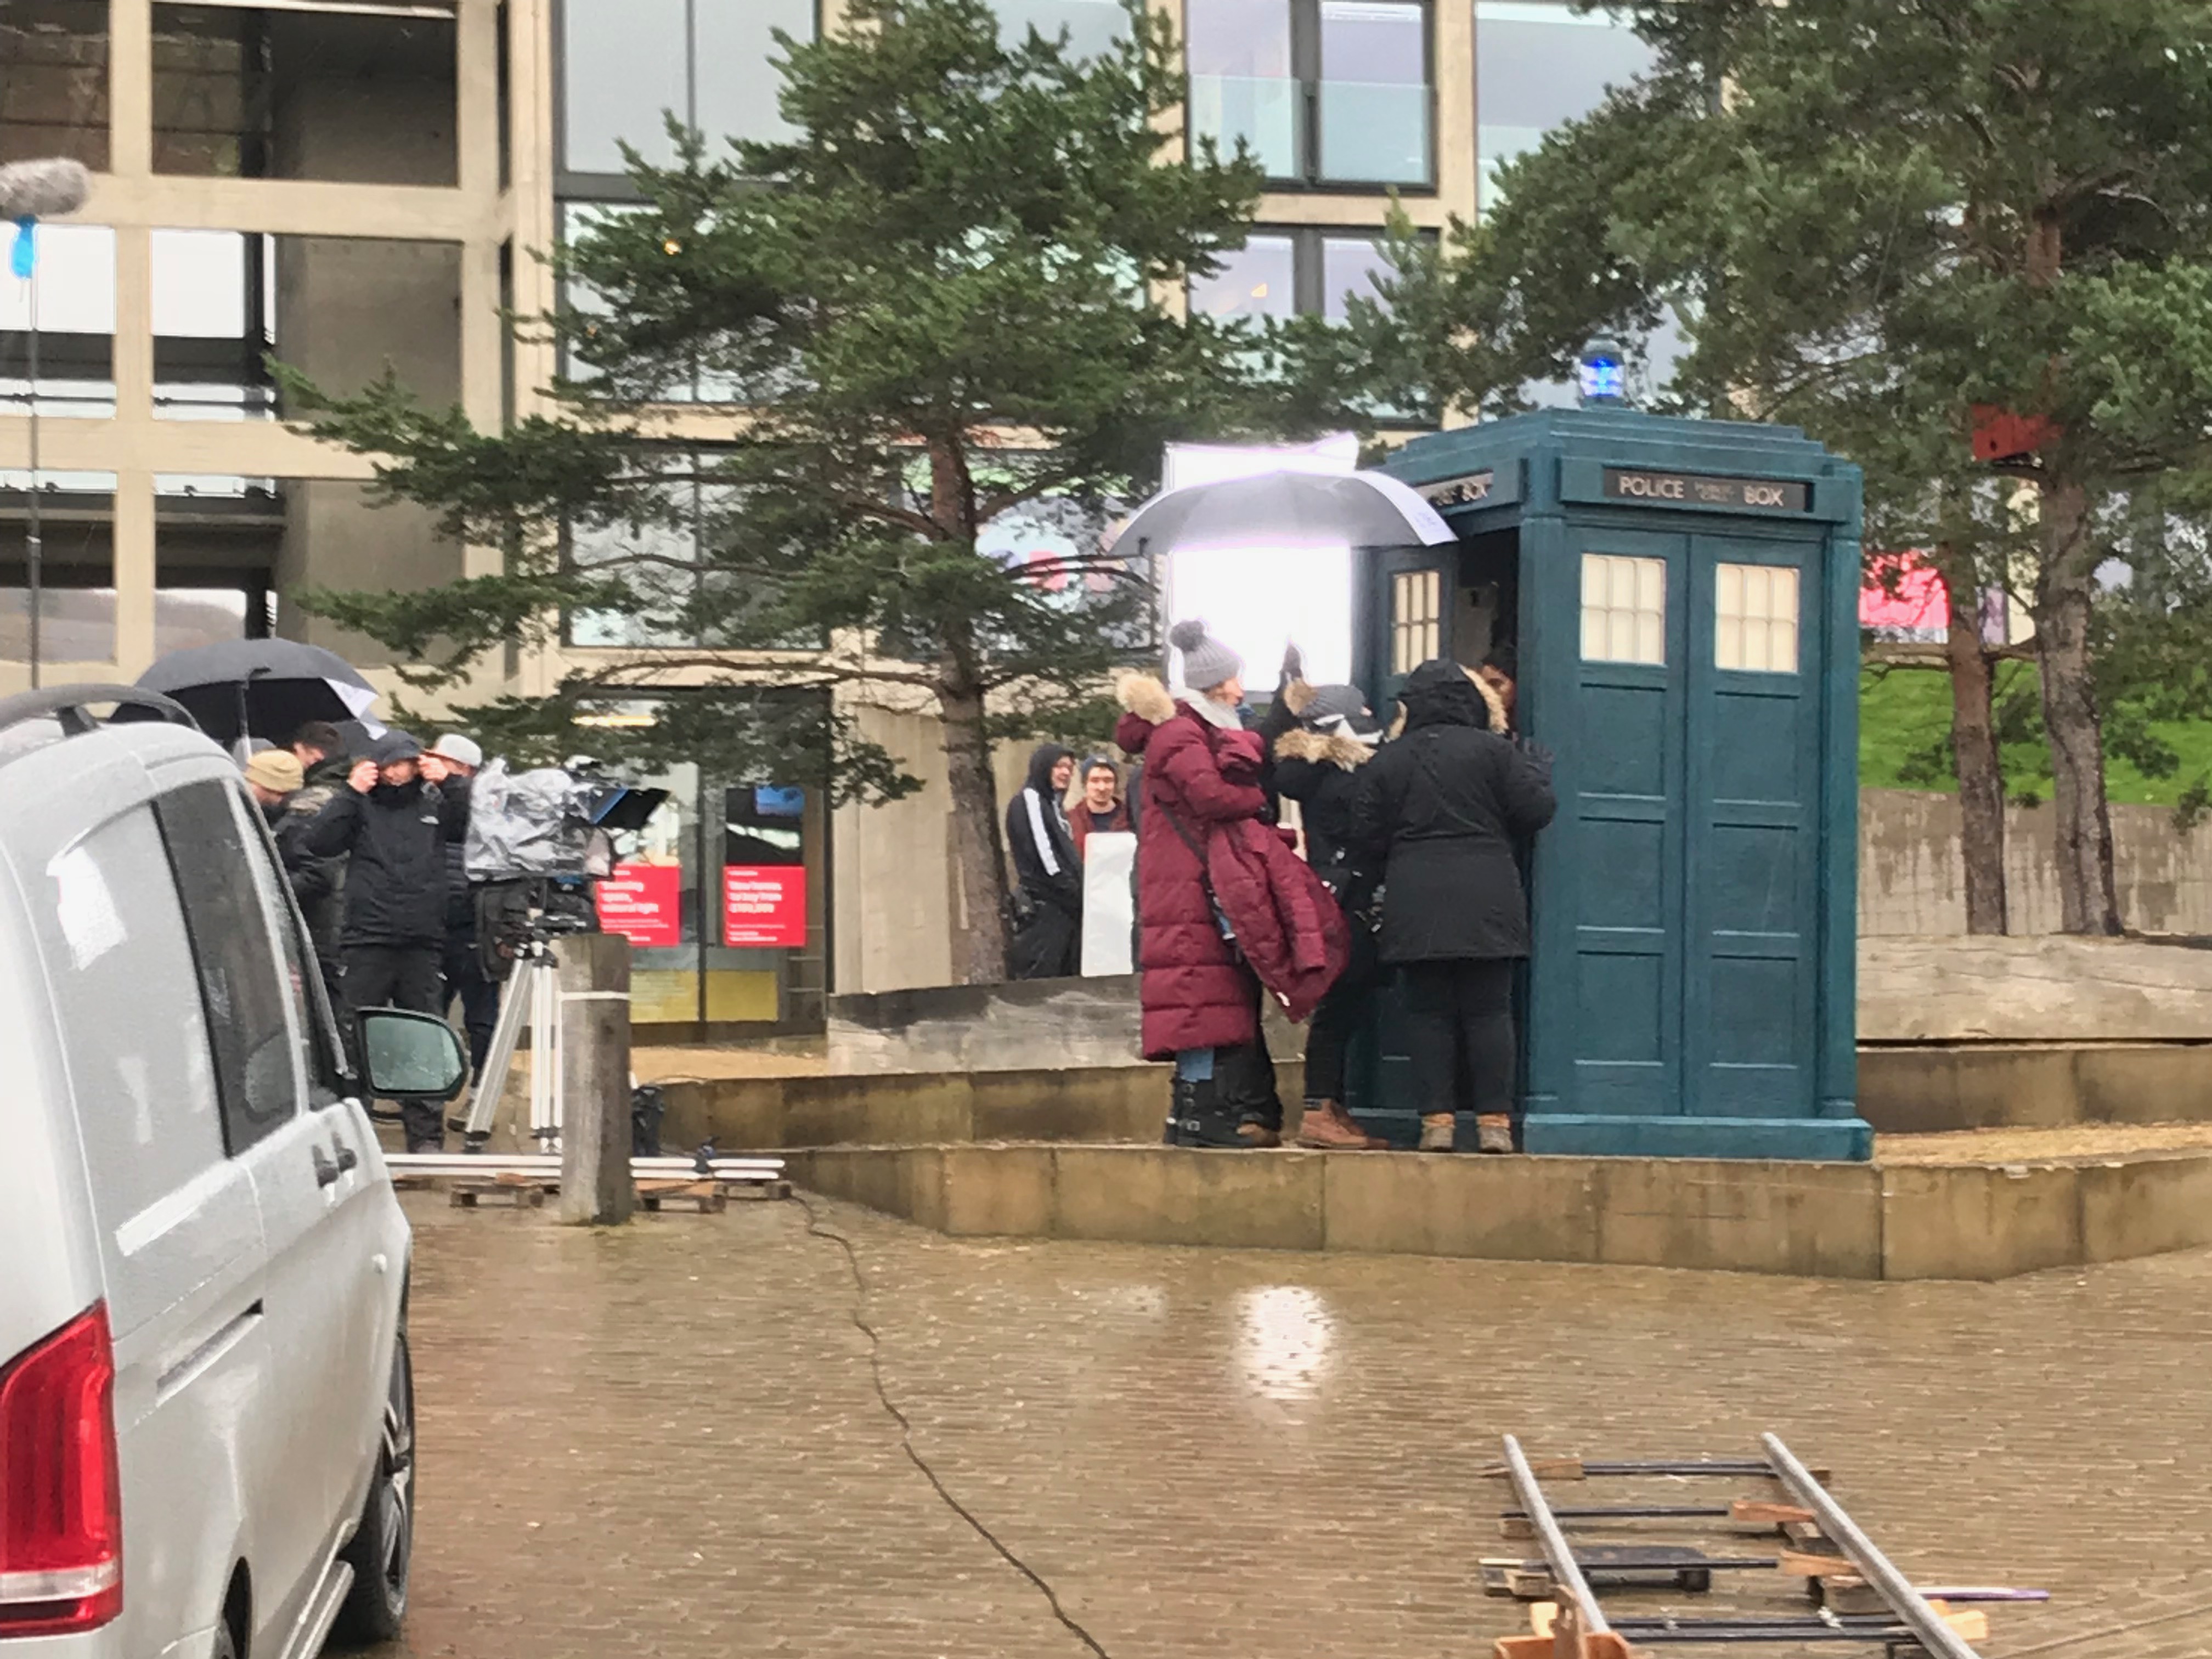 doctor-who-filming-sheffield-2018_39535685724_o